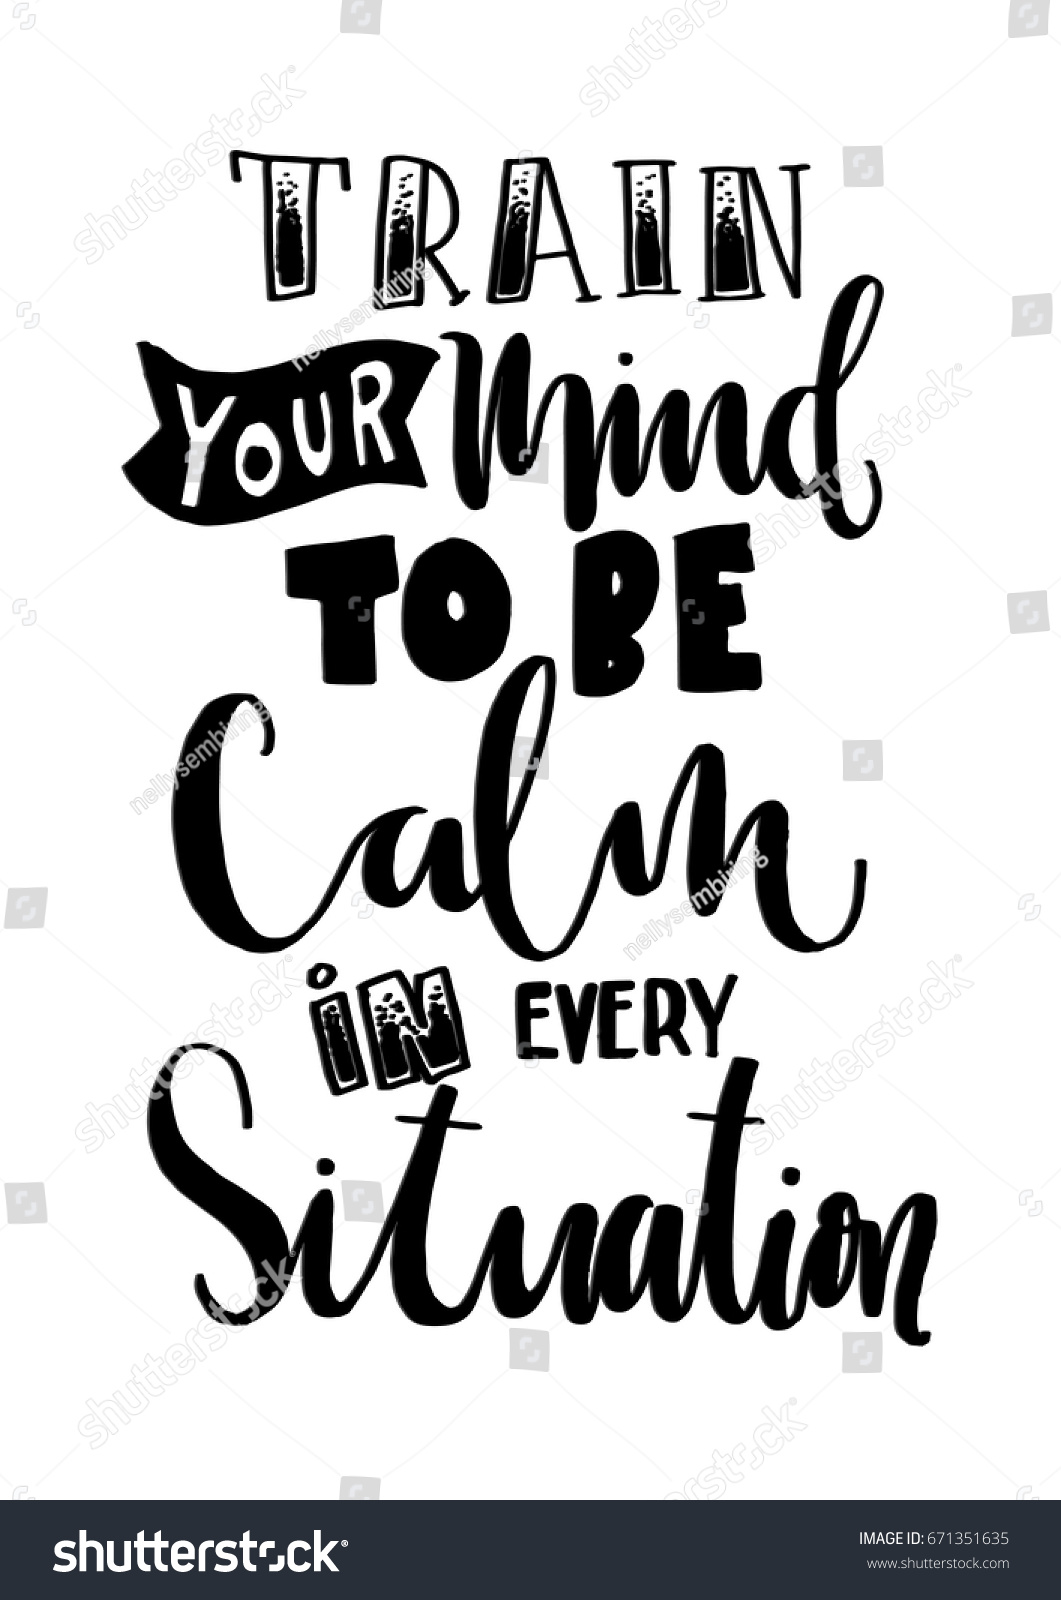 Train Your Mind Be Calm Every Stock Vector Royalty